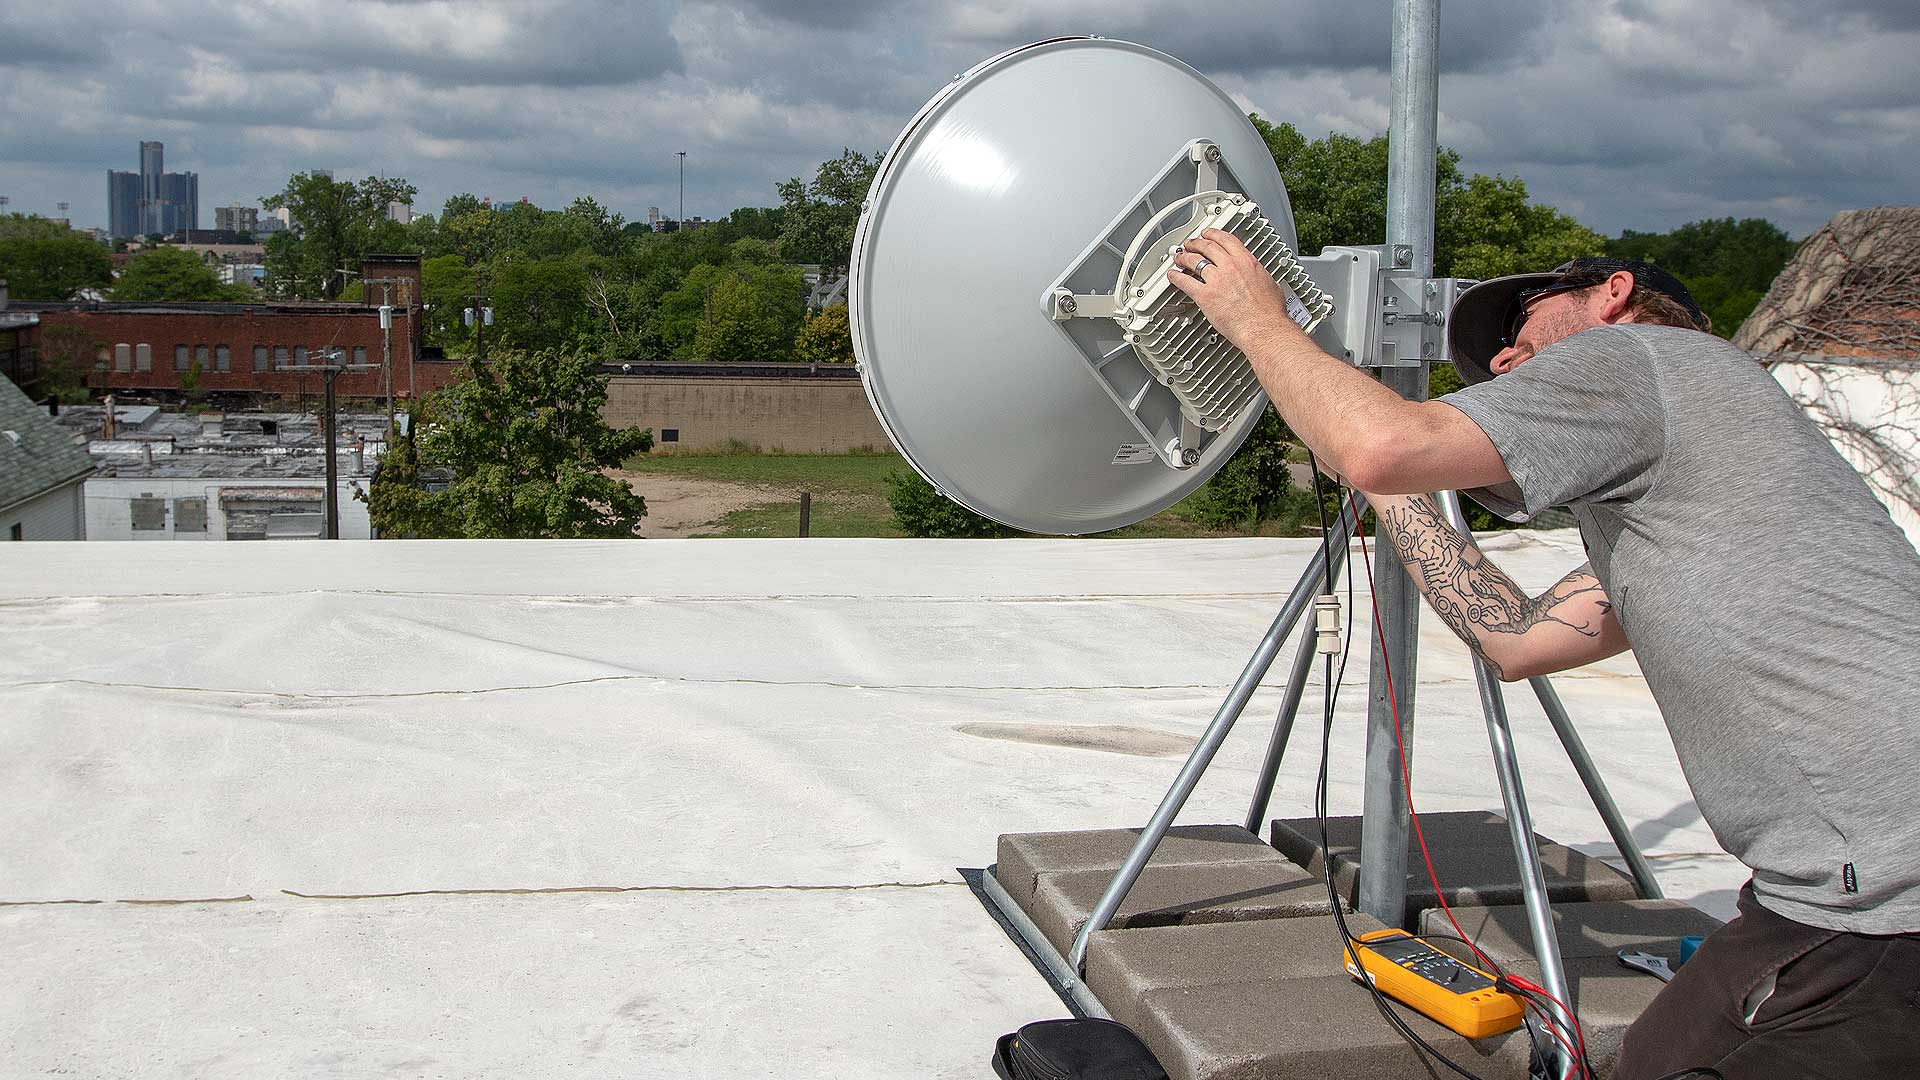 123NET's Network Operations Team with a Fixed Wireless Tower